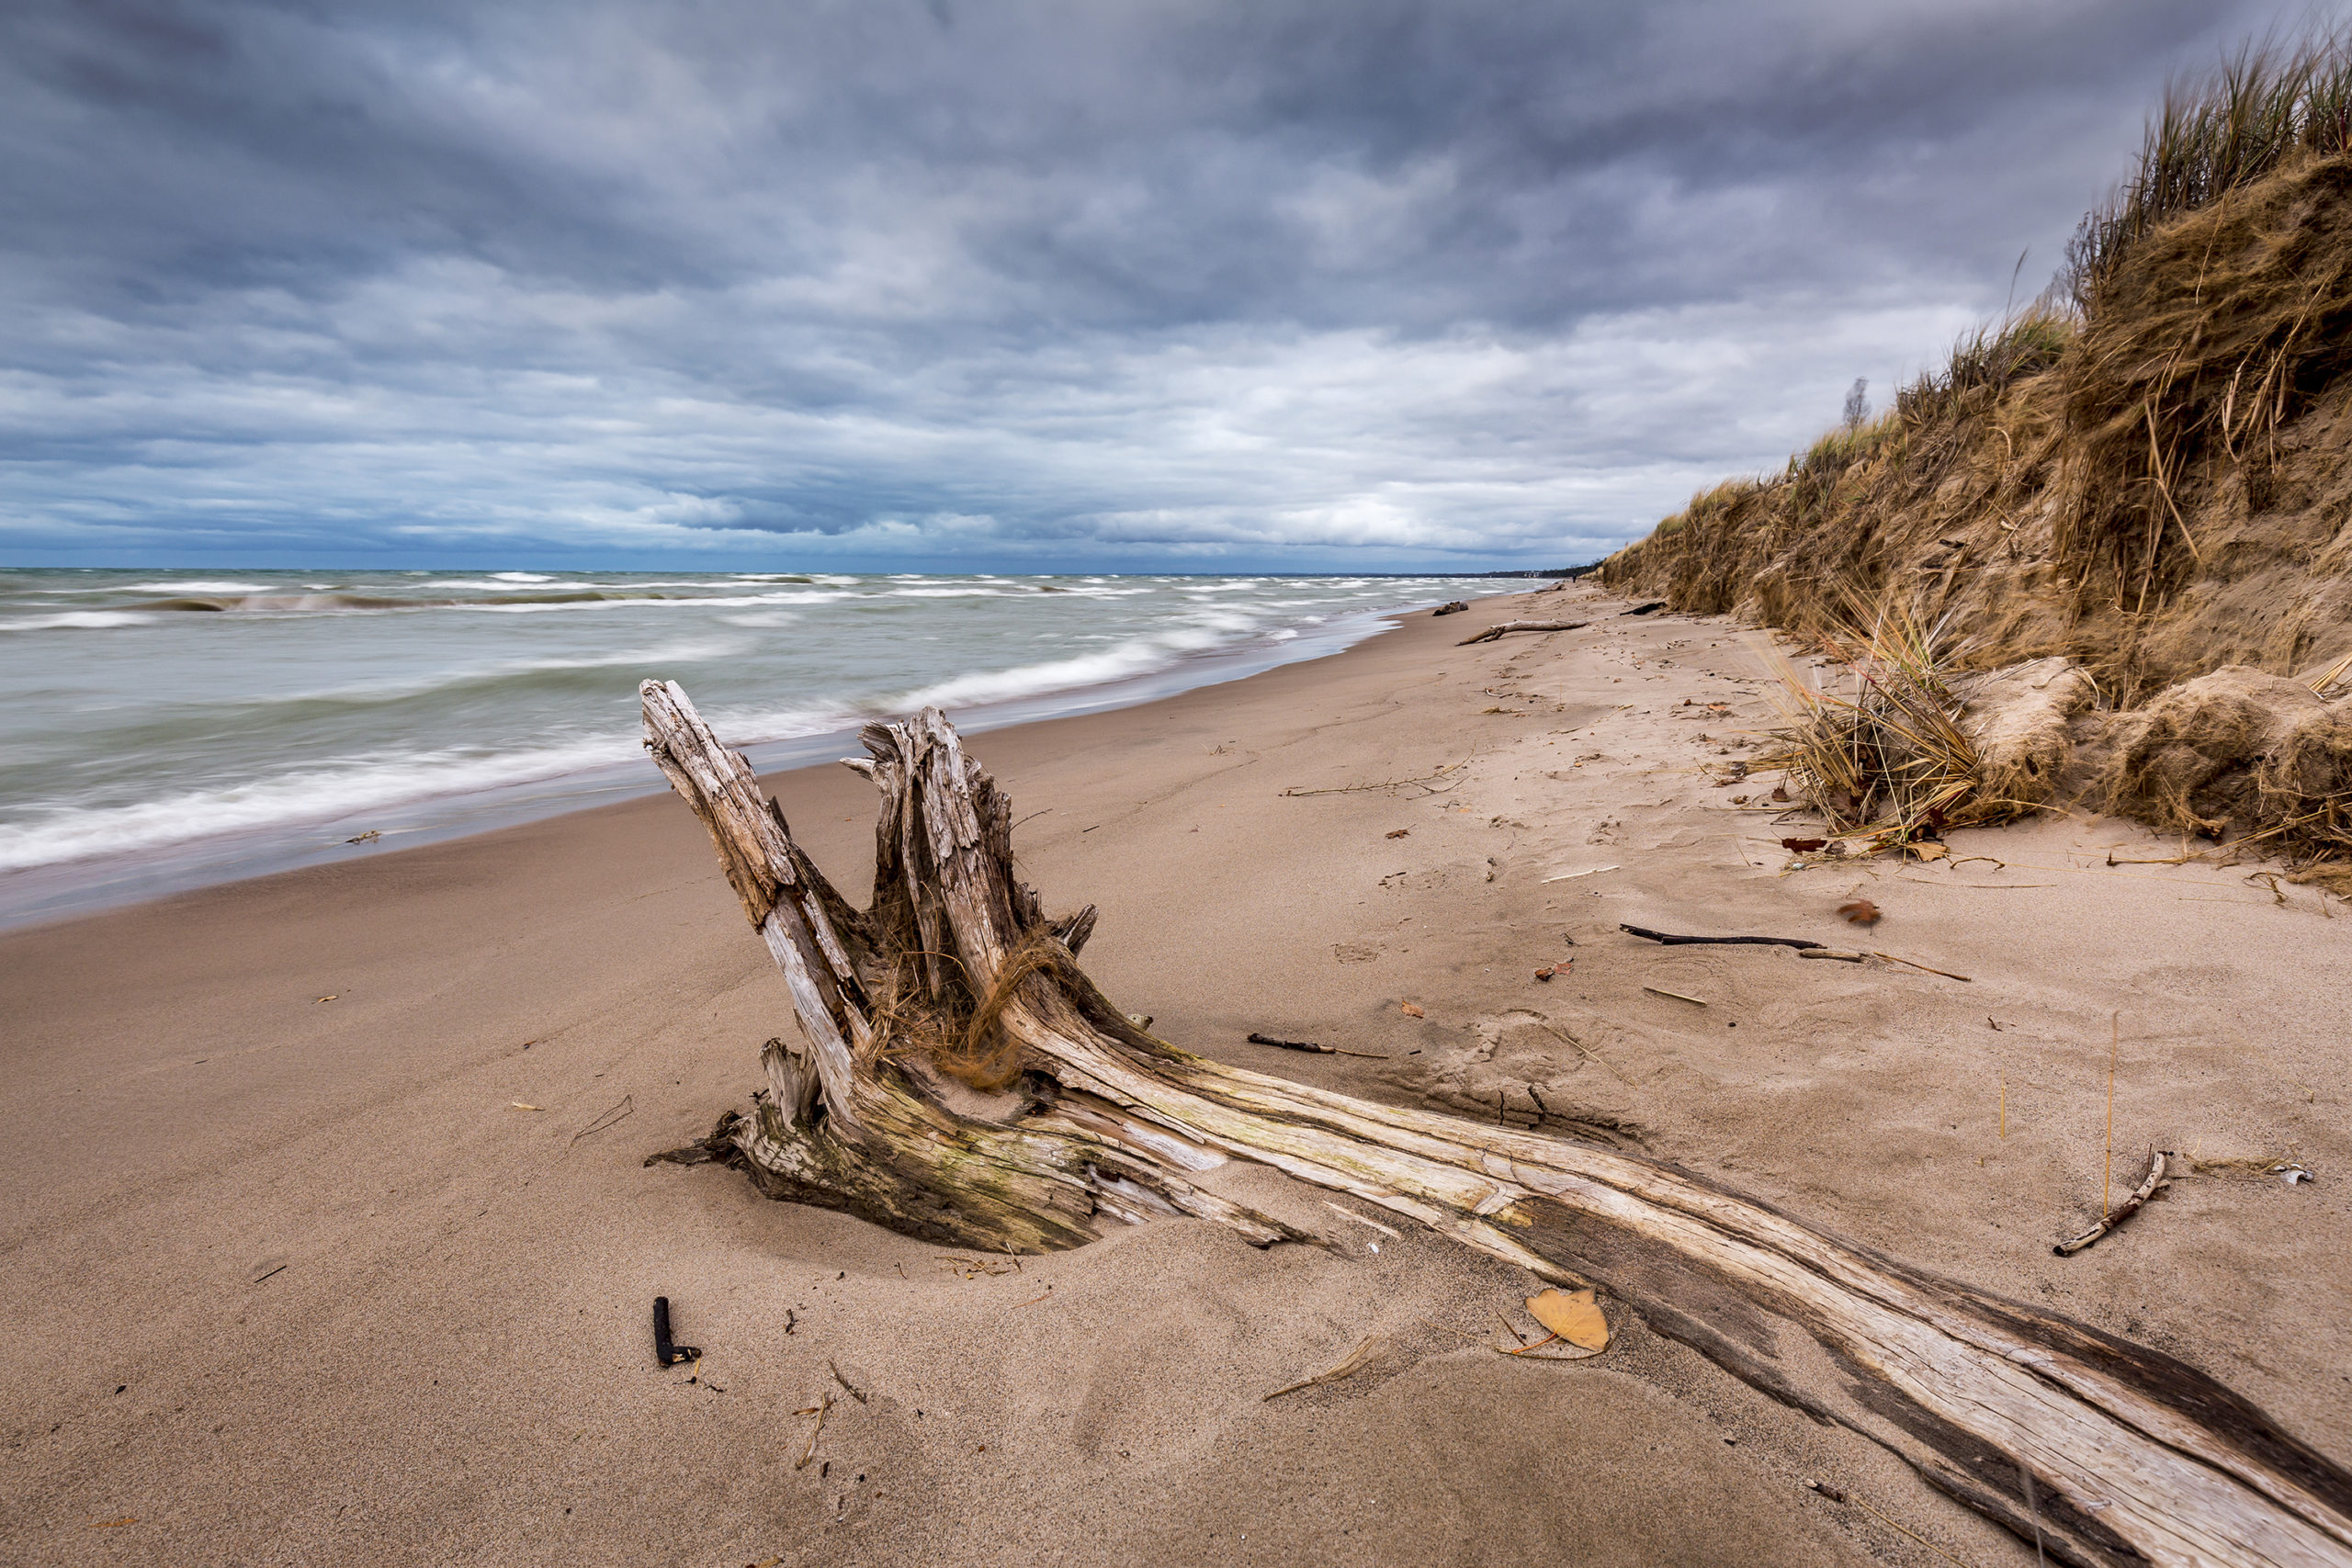 Autumn storm clouds form over driftwood on a Lake Huron beach - Pinery Provincial Park, Ontario, Canada